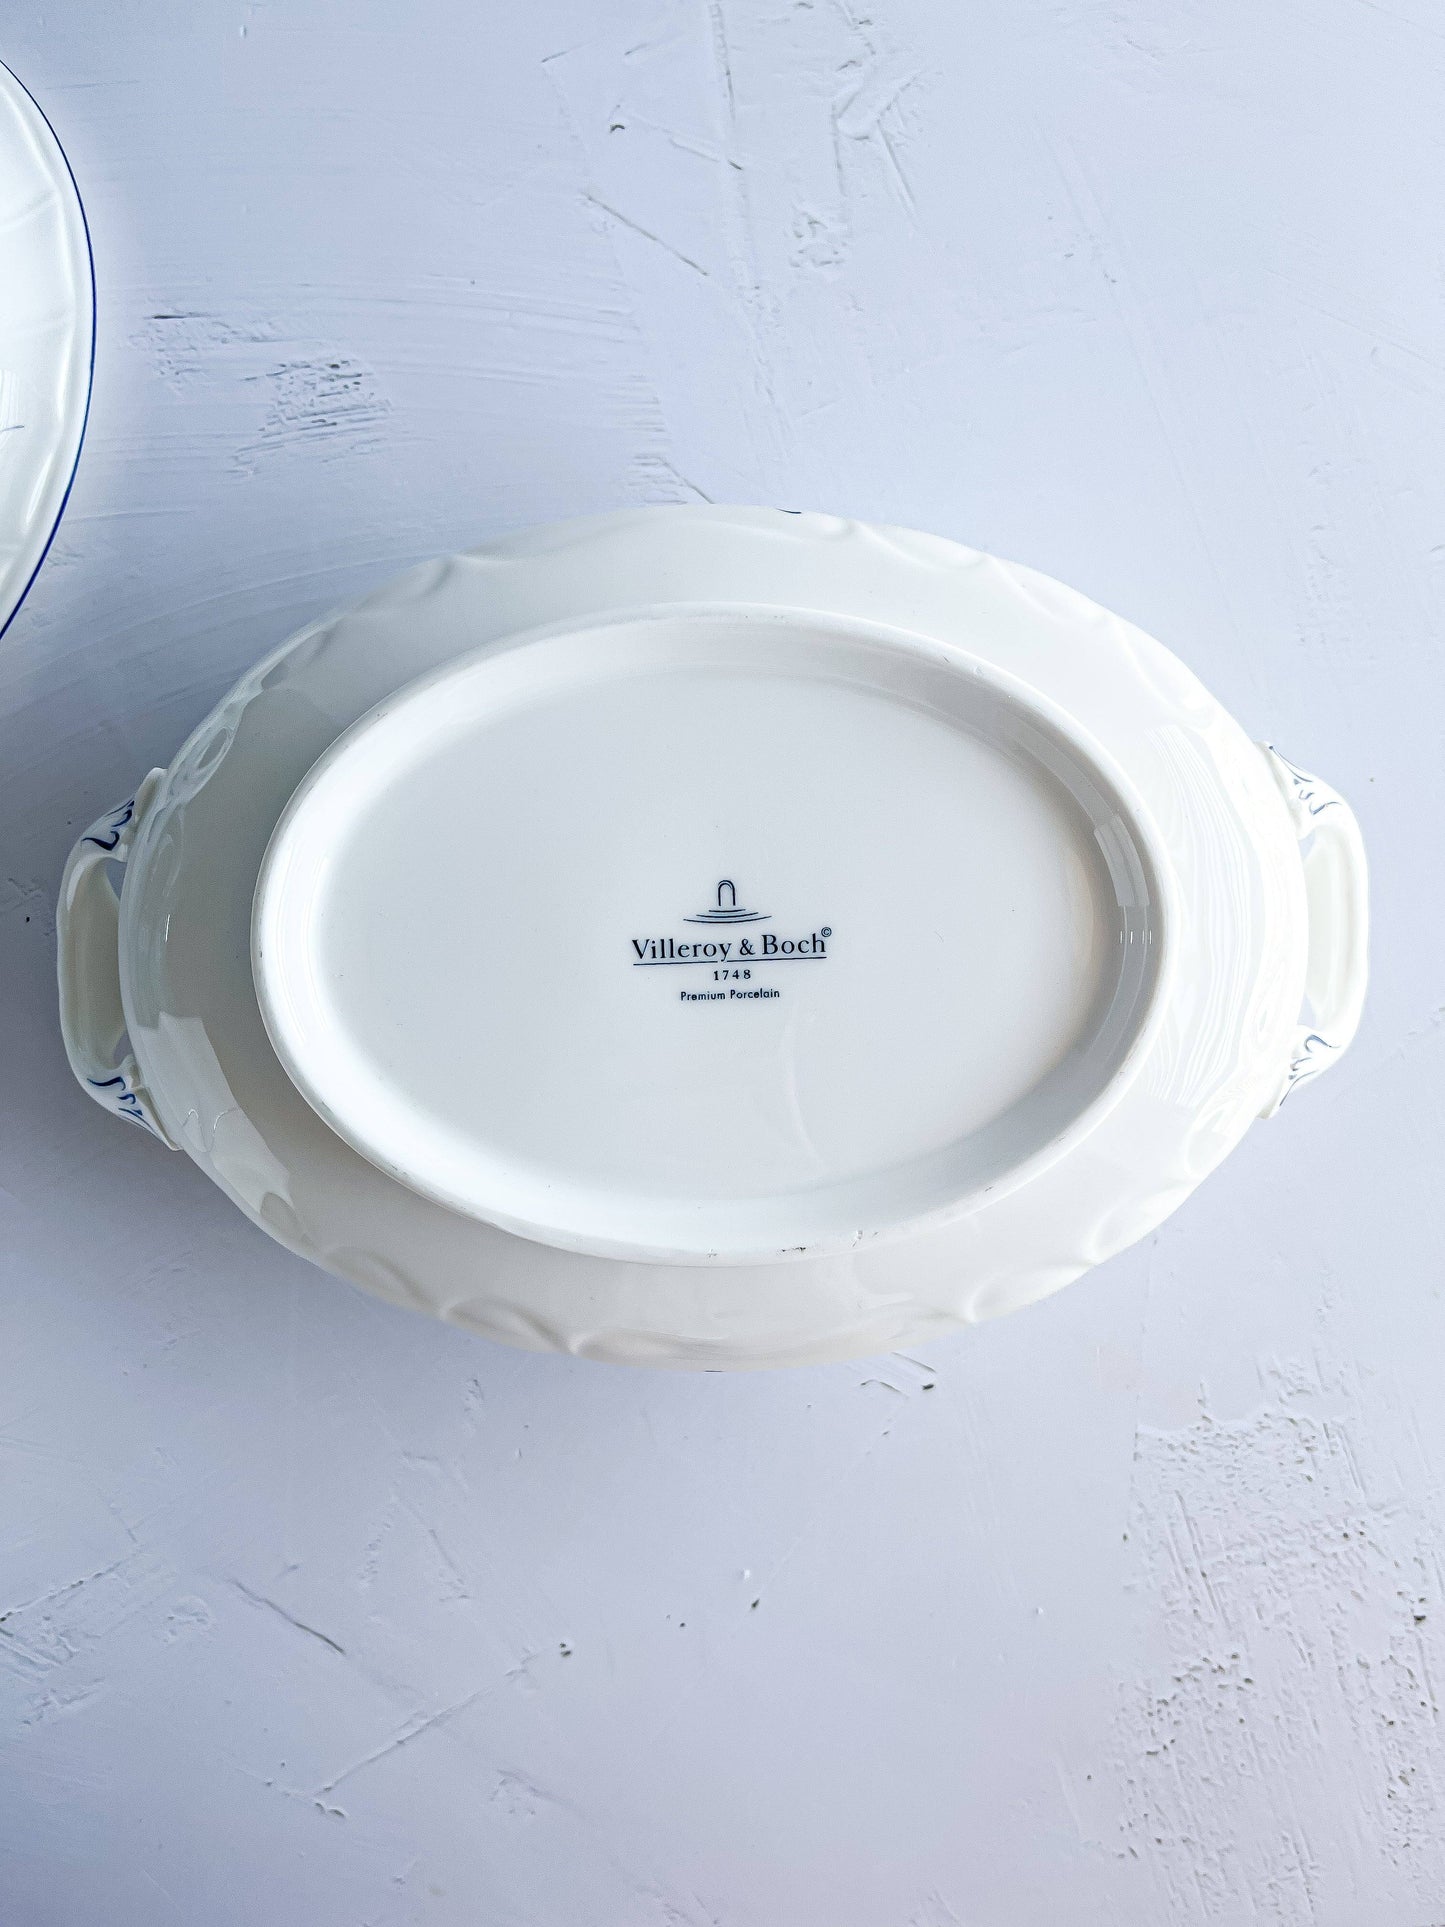 Villeroy & Boch 'Vieux Luxembourg' Tureen - SOSC Home